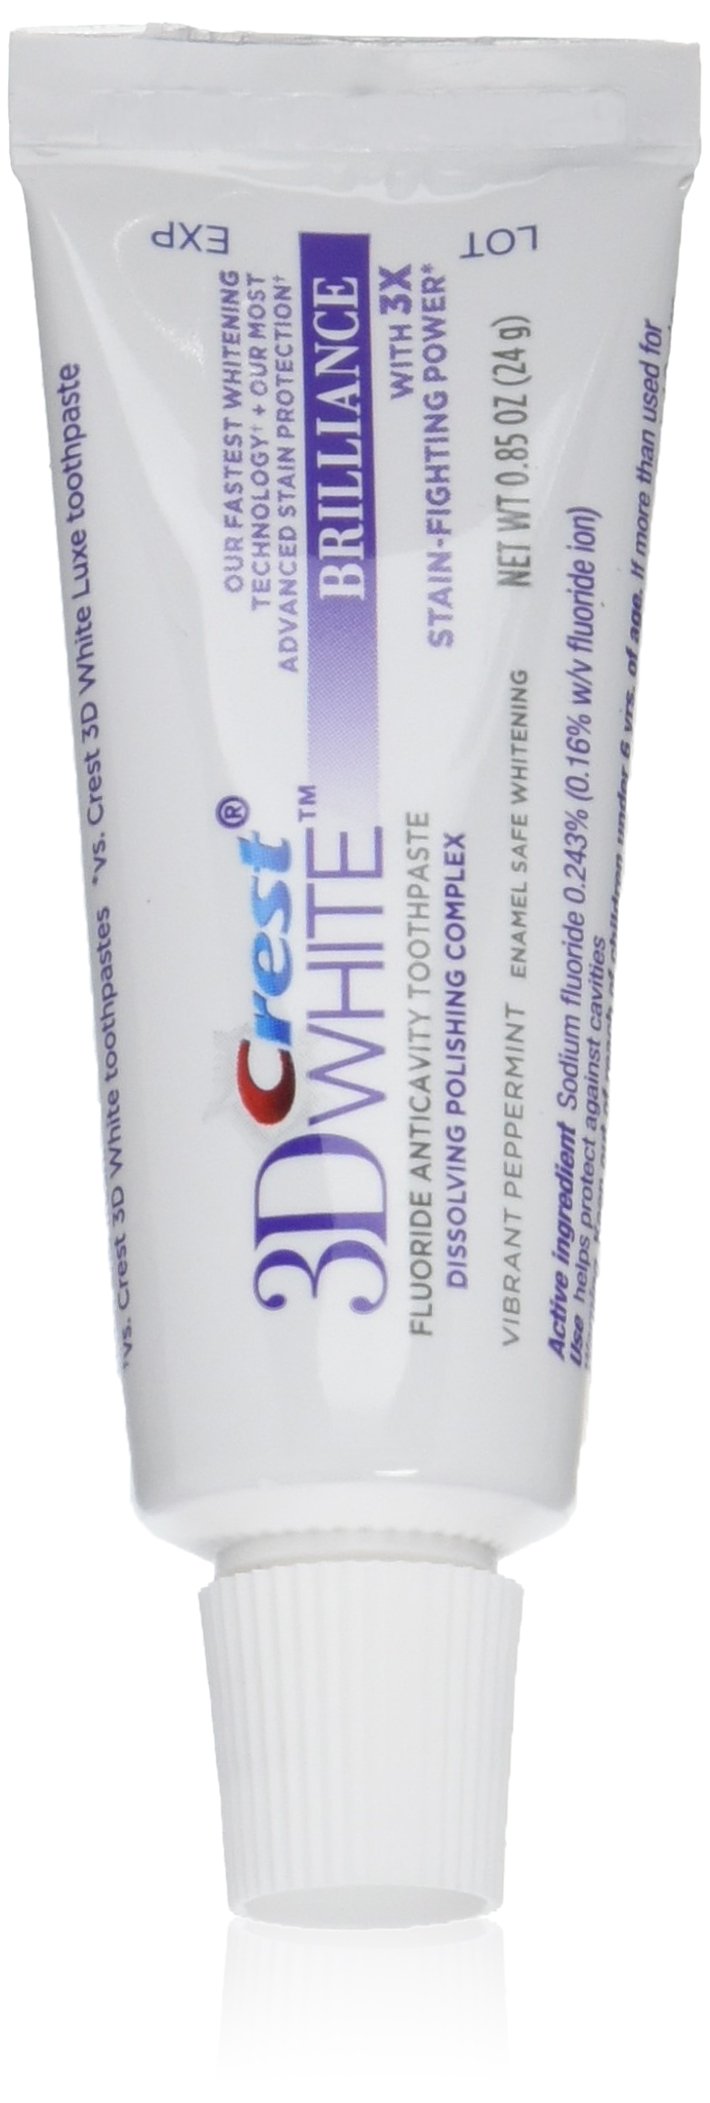 Crest 3D White Brilliance Advanced Whitening Technology Plus Advanced Stain Protection Toothpaste, Vibrant Peppermint, 0.85 Ounce